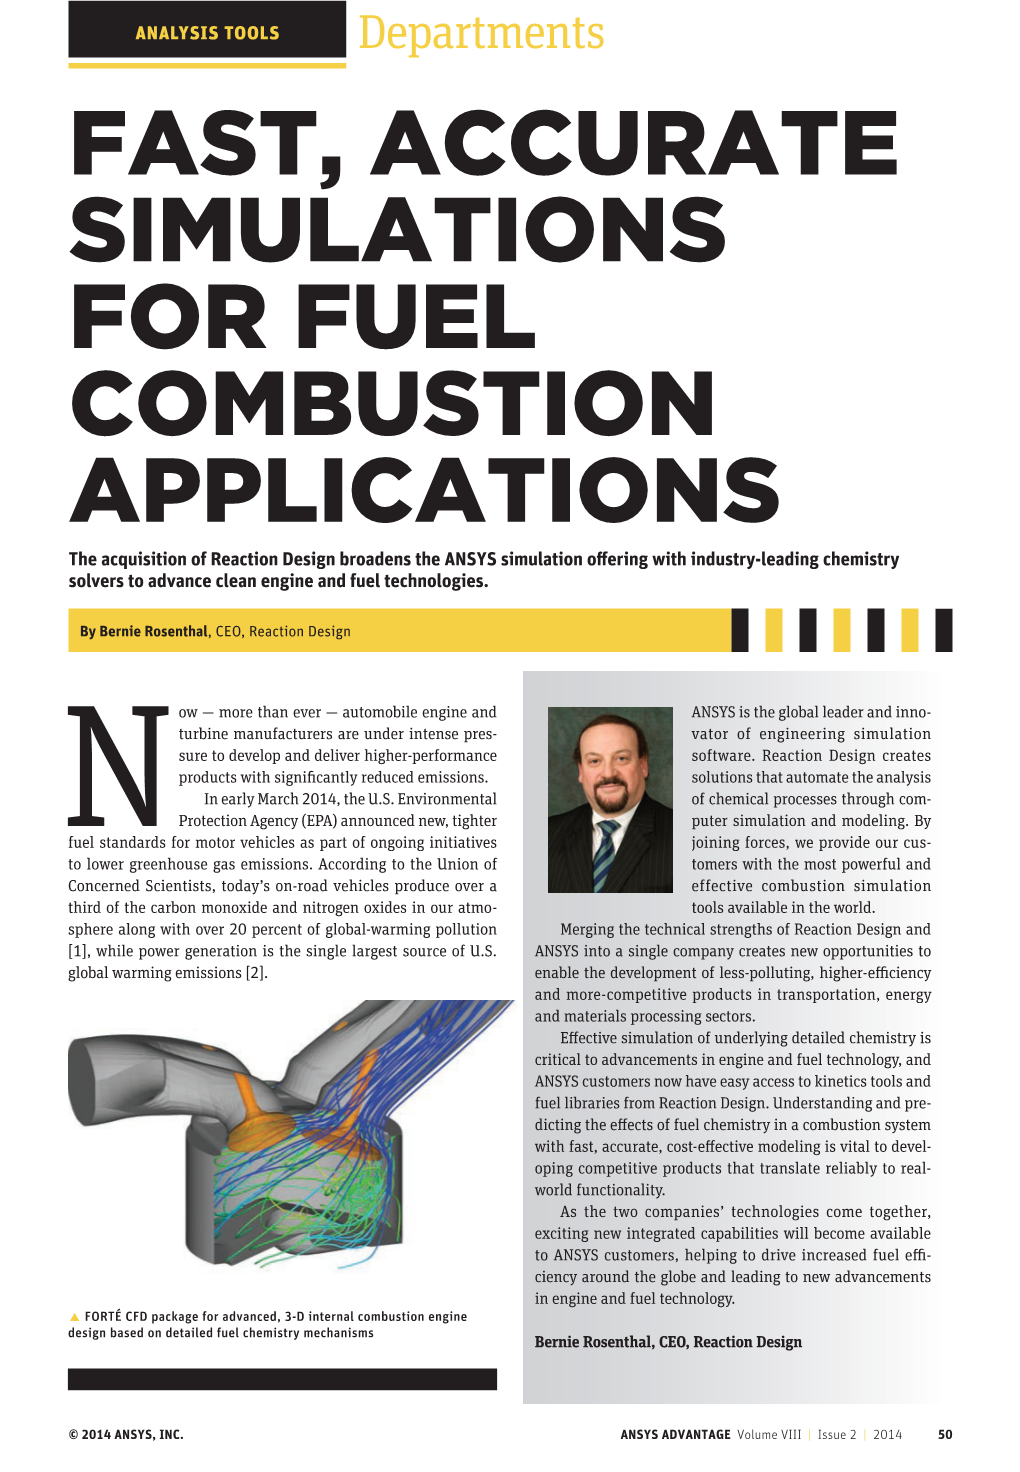 Fast, Accurate Simulations for Fuel Combustion